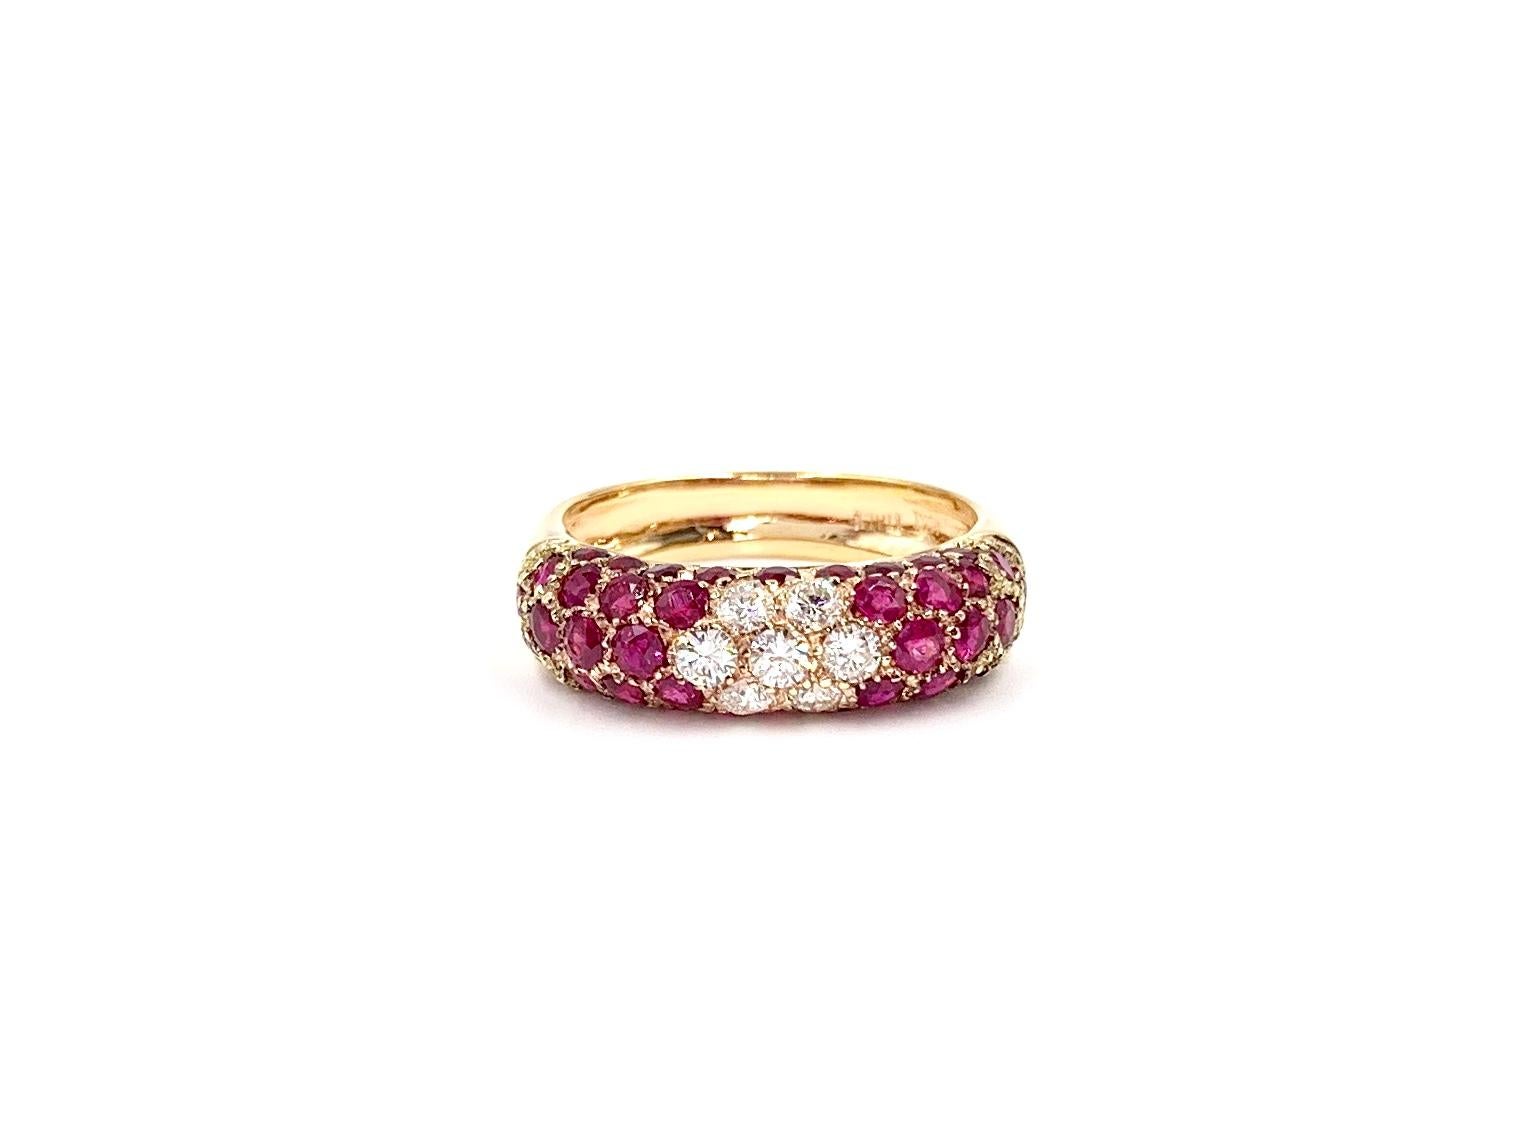 A very well made and wearable slightly domed 6mm polished 18 karat rose gold band ring featuring 2.40 carats of vibrant rubies and .40 carats of round brilliant white diamonds. White diamonds are of high quality at approximately F color, VS2 clarity